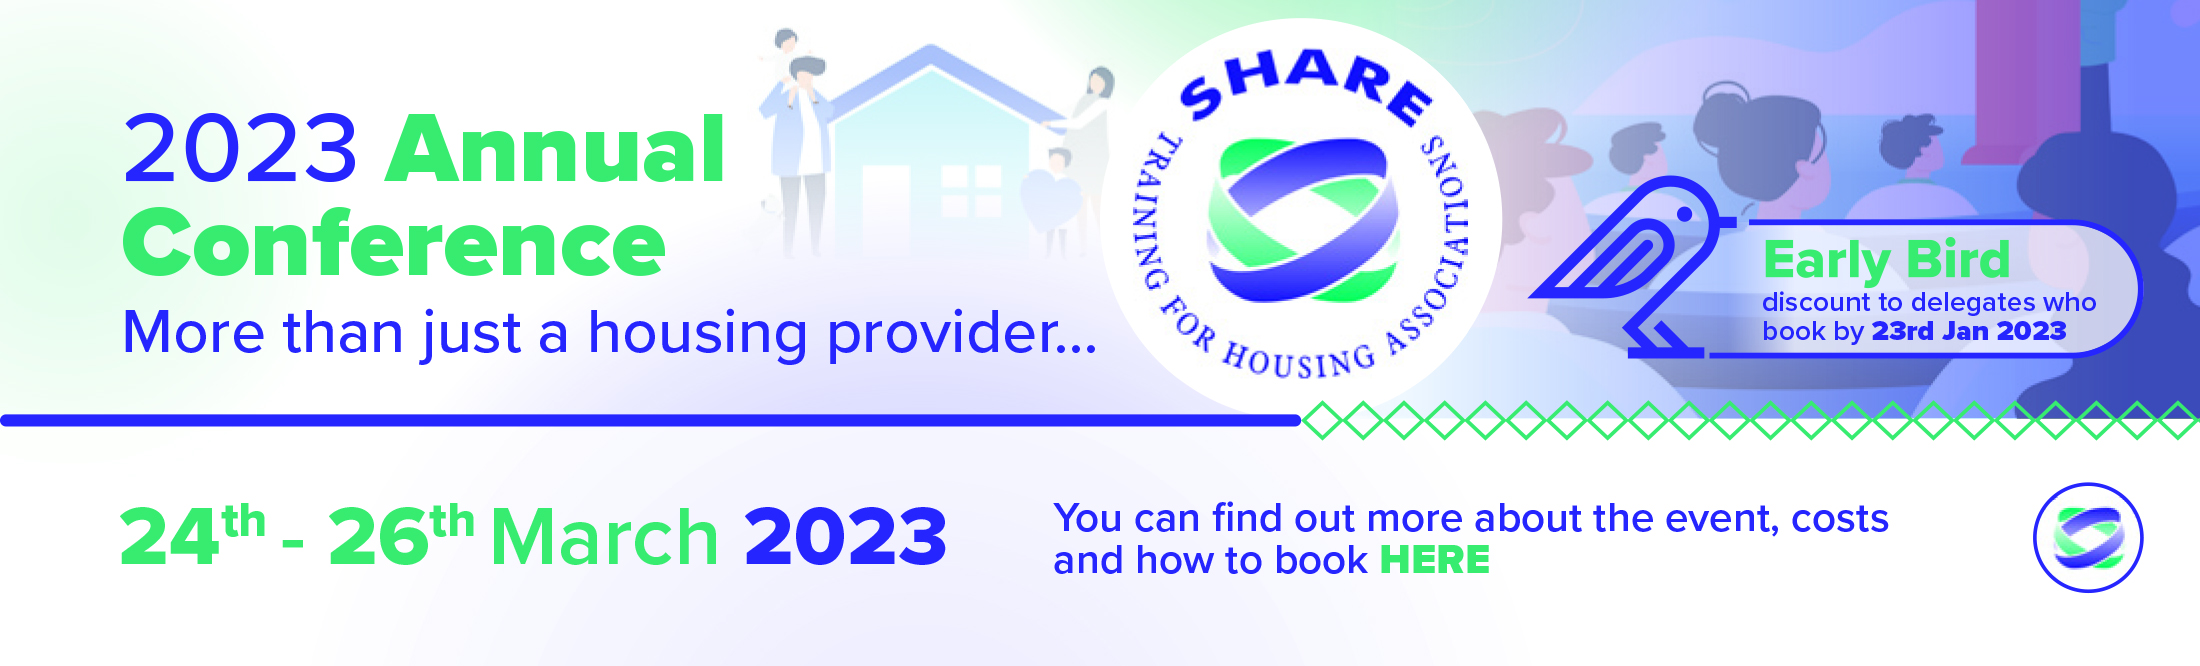 SHARE 2023 Annual Conference is launched with ticket prices frozen at the 2020 rates